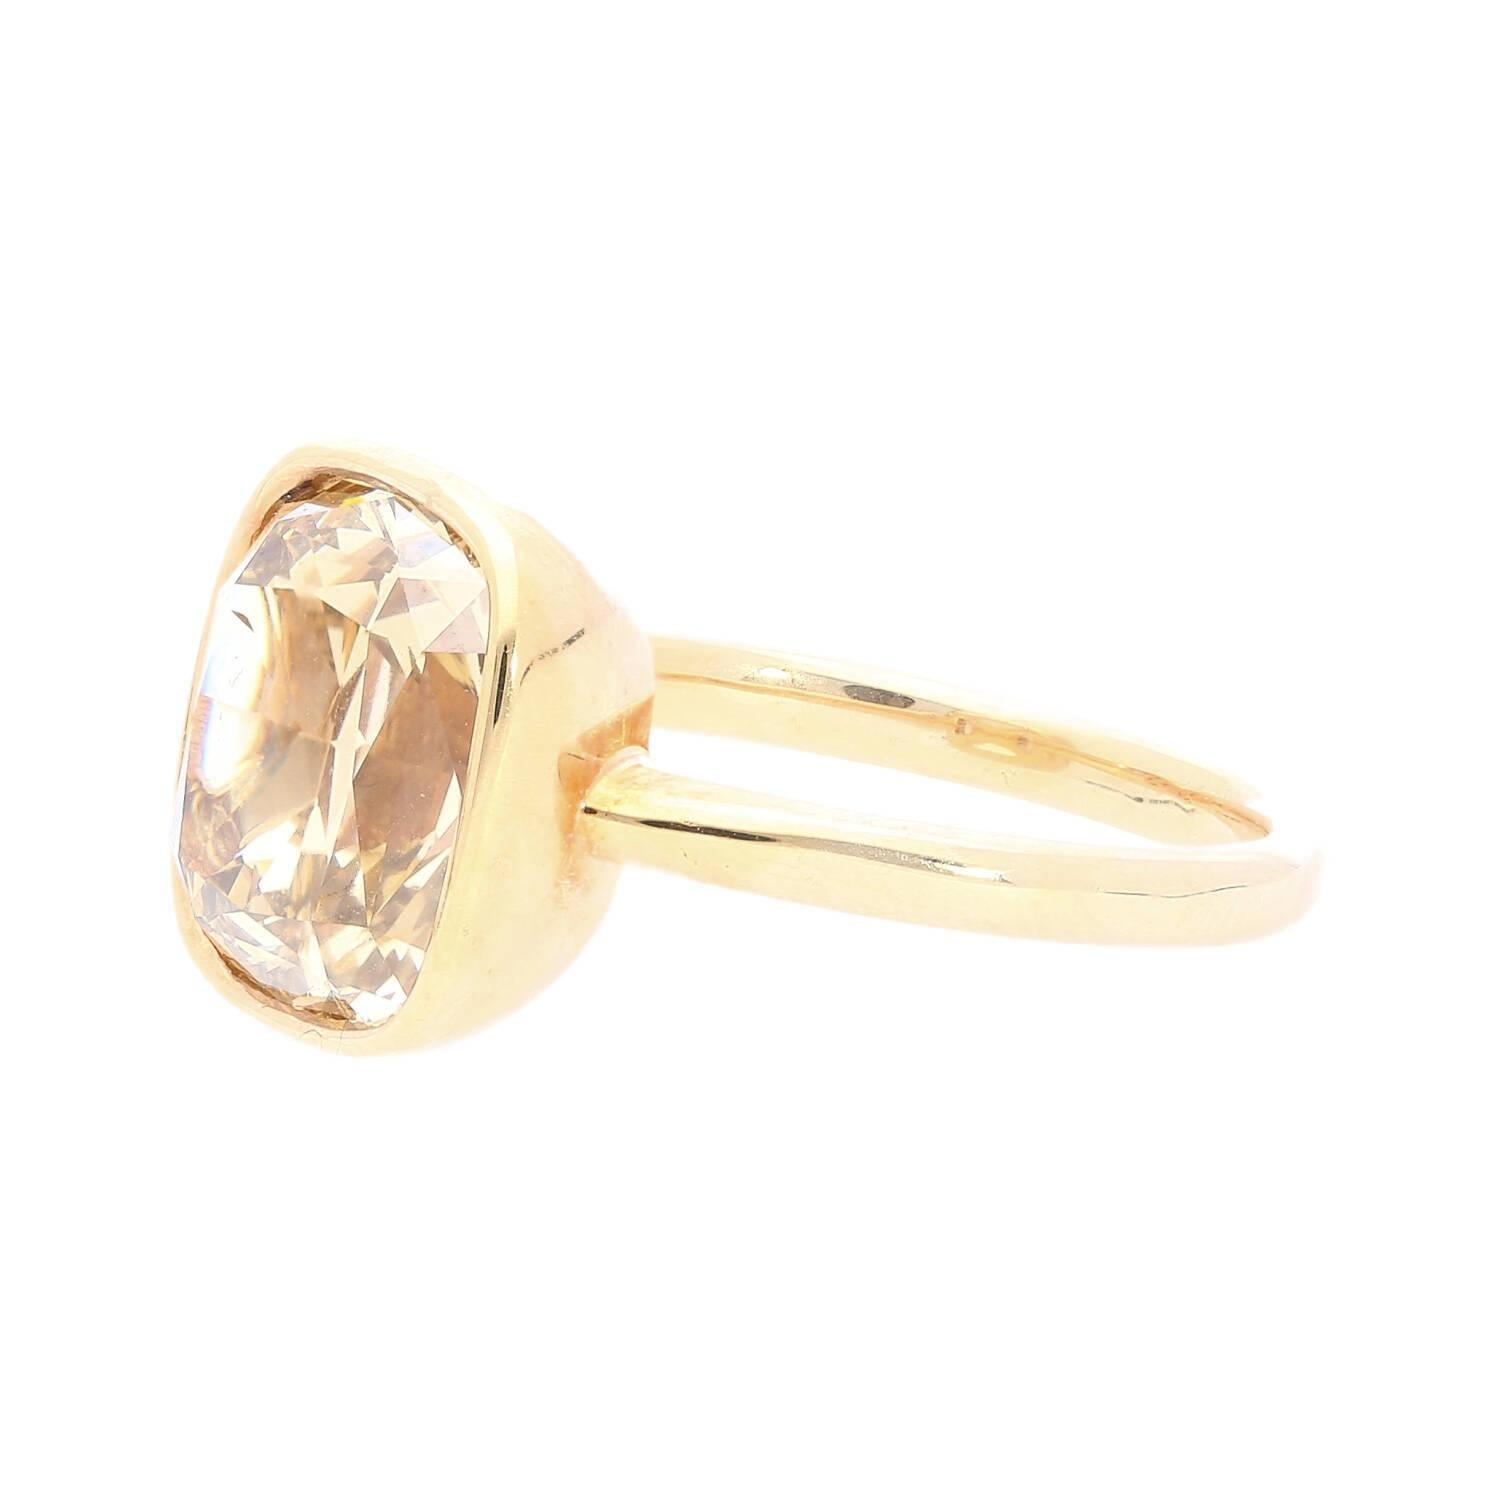 GIA Certified 5.02 Carat Cushion Cut Fancy Brown Yellow Diamond Ring in 18k Rose In New Condition For Sale In Miami, FL